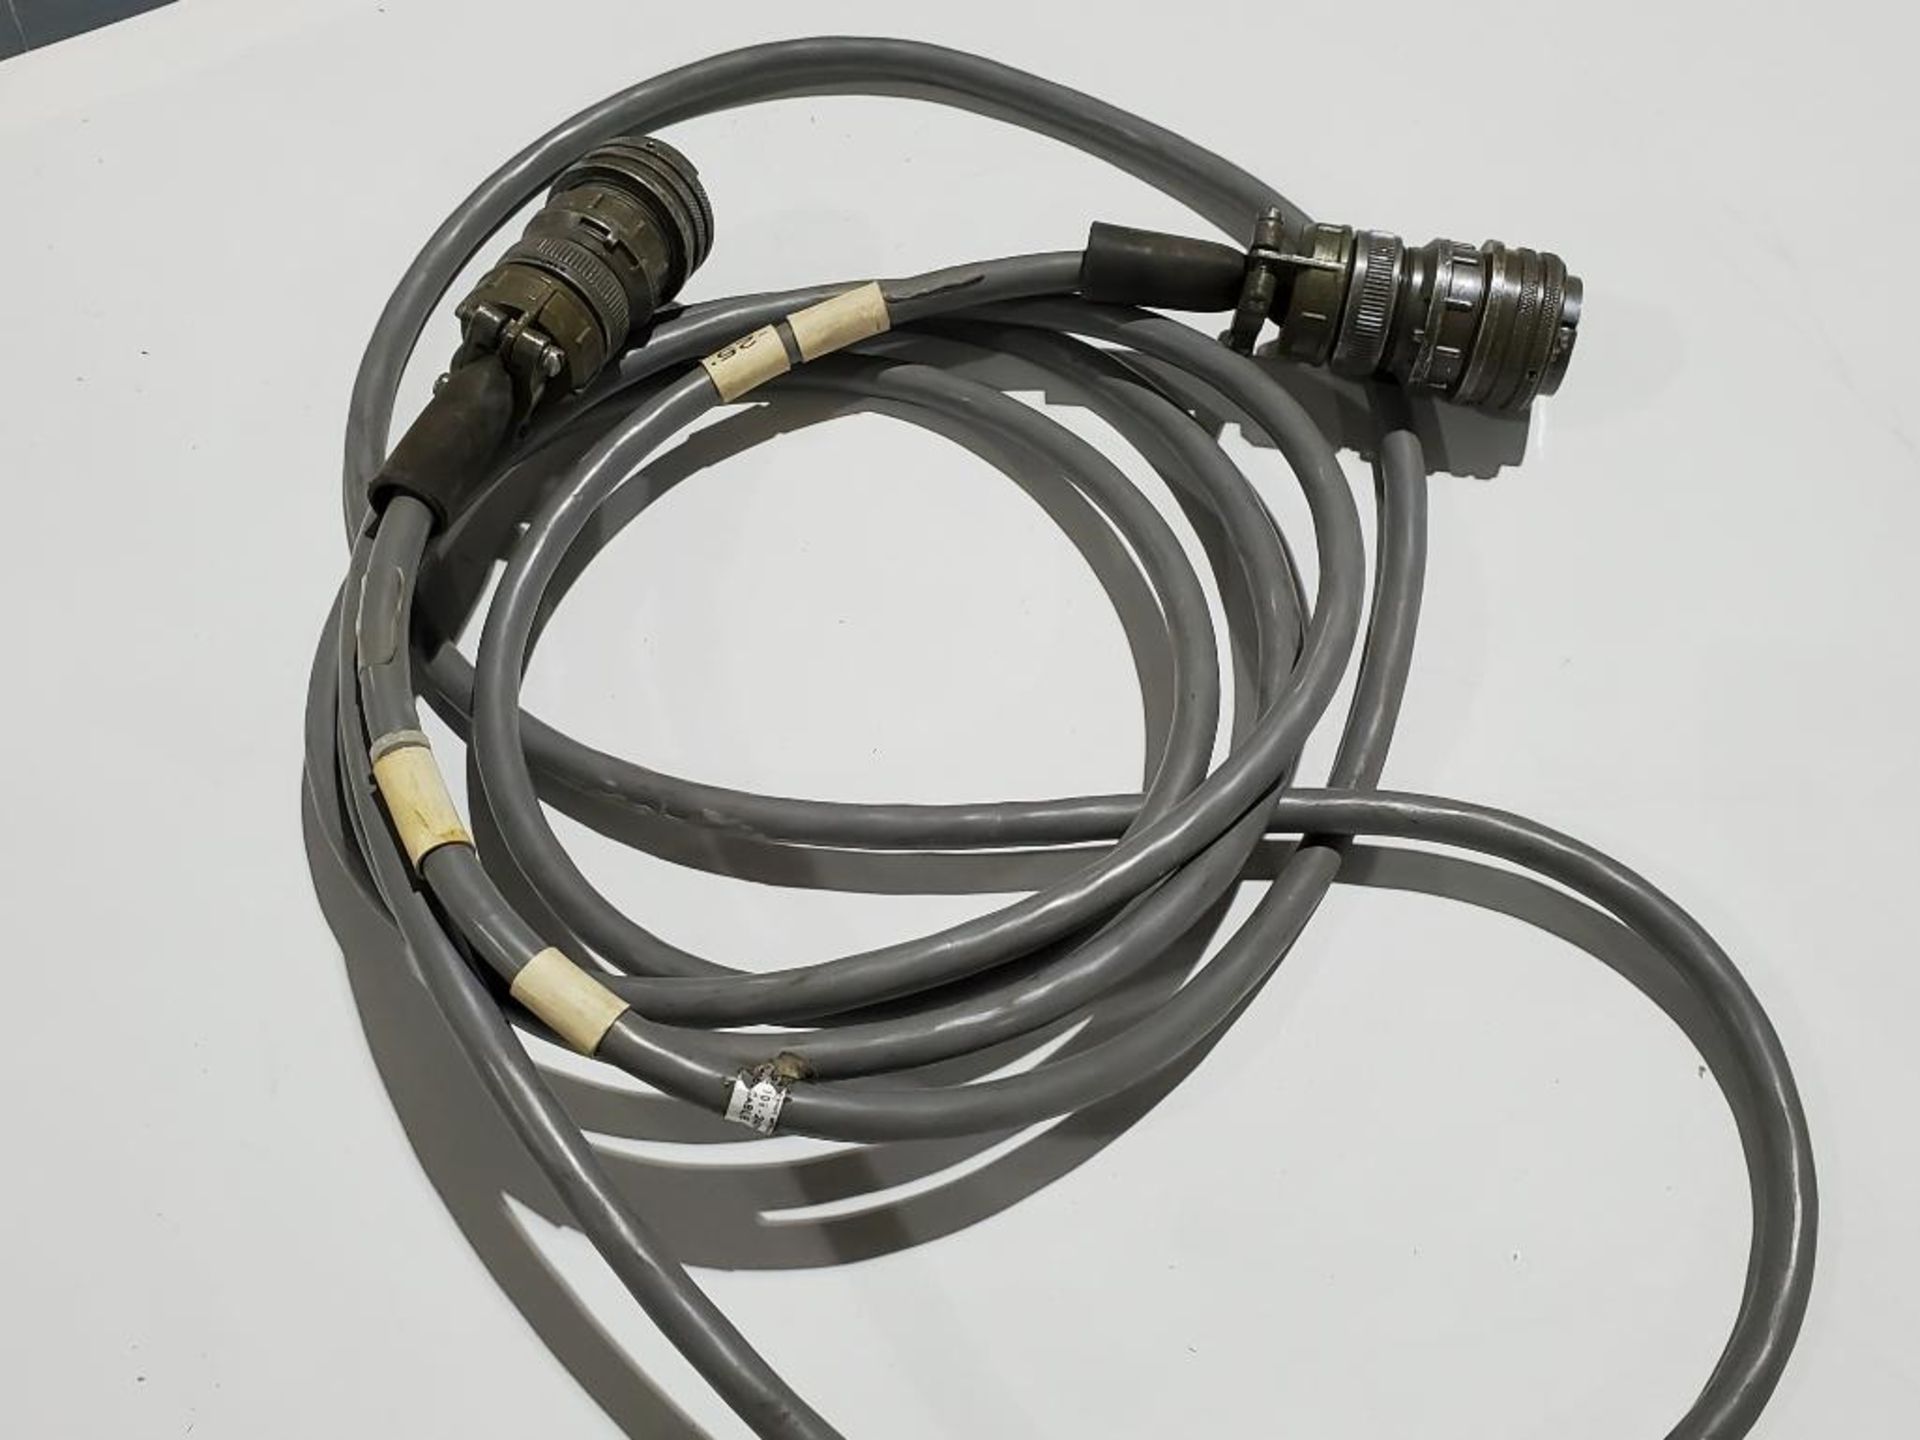 Assorted interconnect cables. - Image 2 of 9